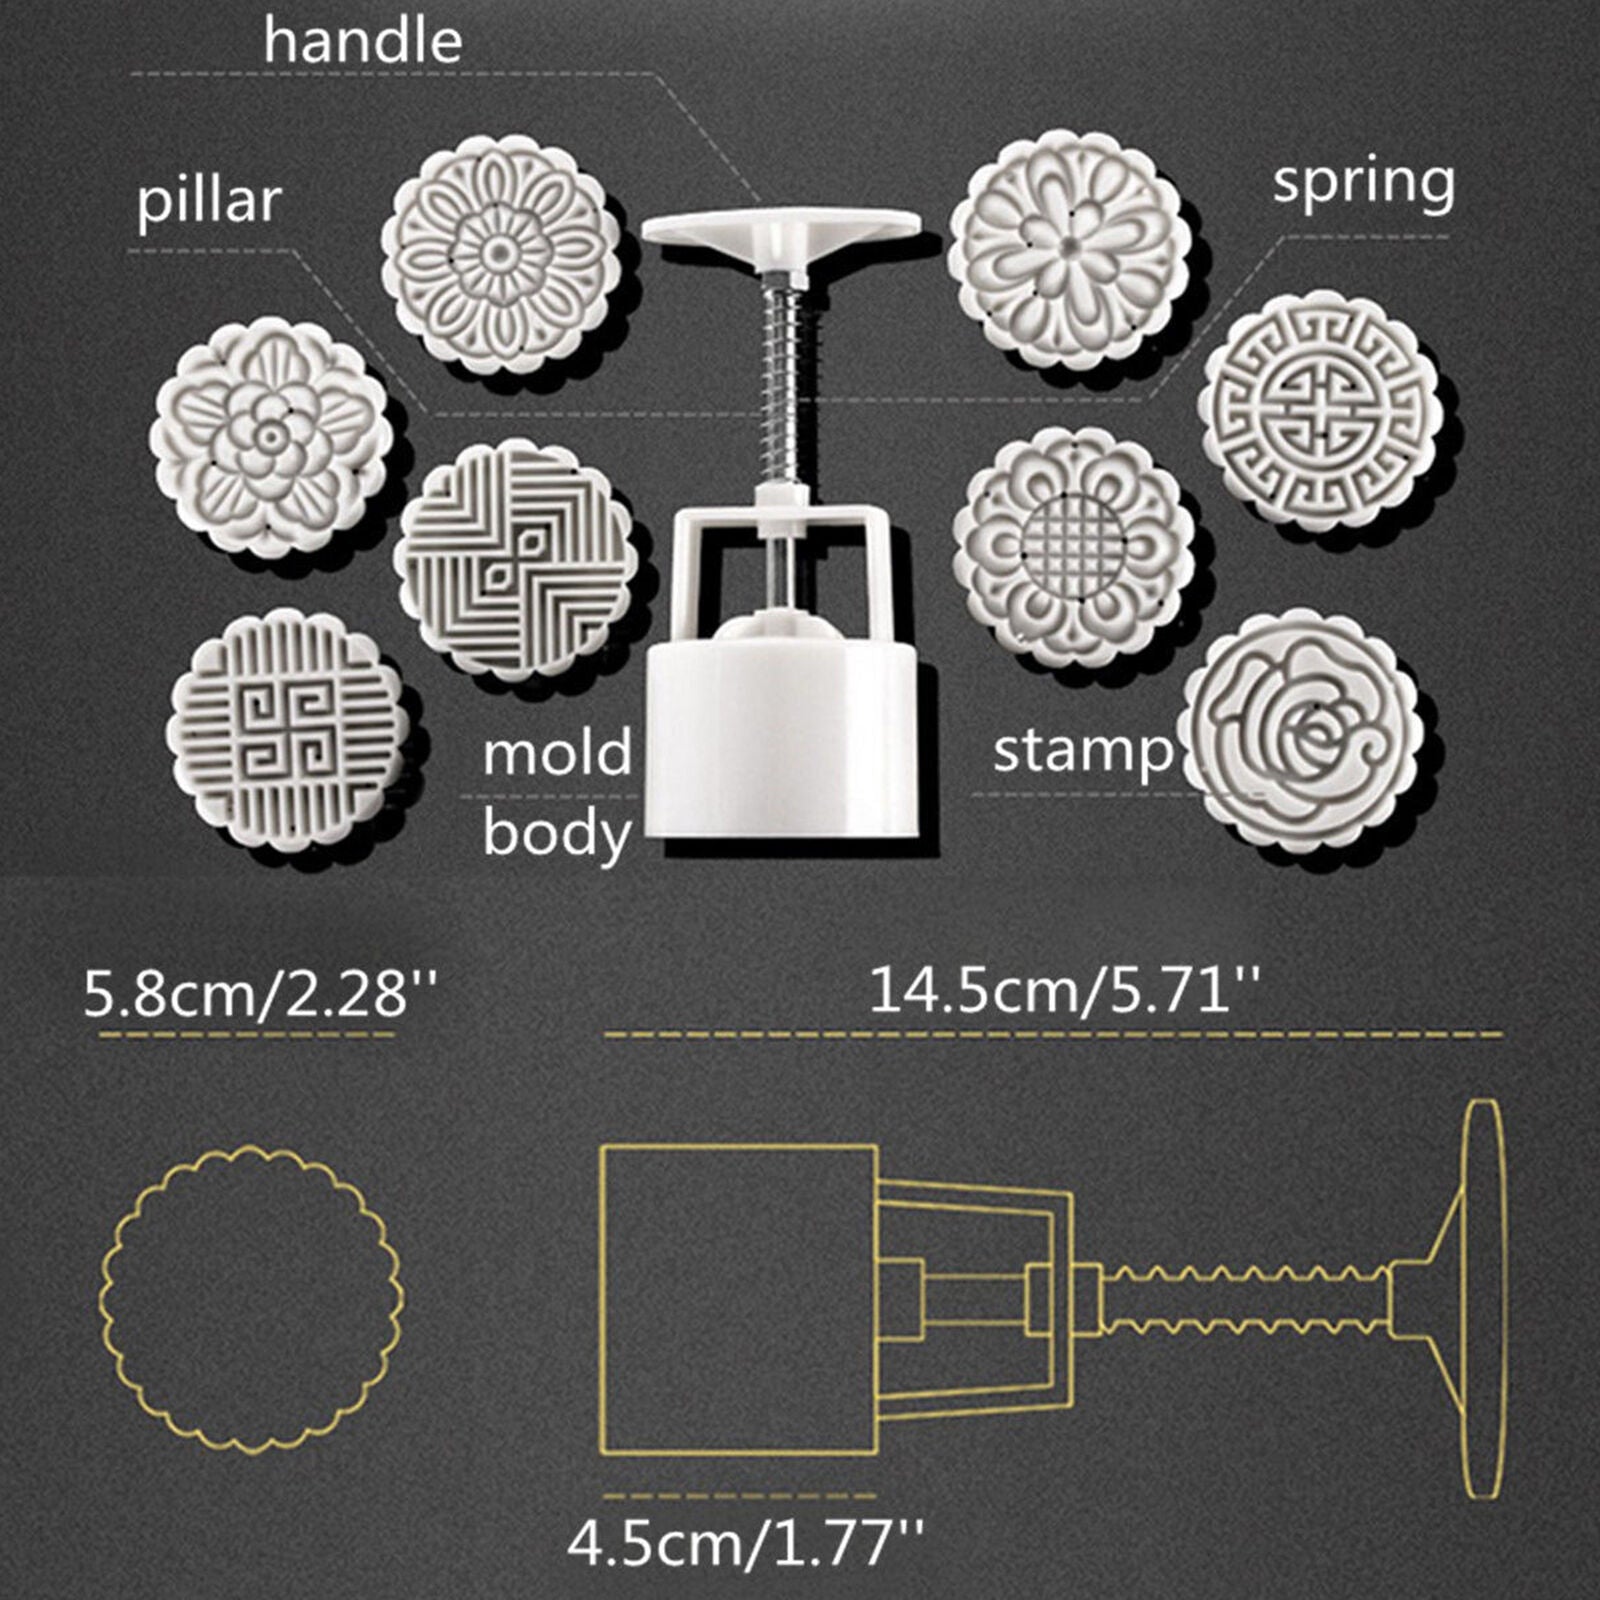 75g Mooncake Mold + 8 Flower Stamps DIY Baking Pastry Round Moon Cake Mould Tool